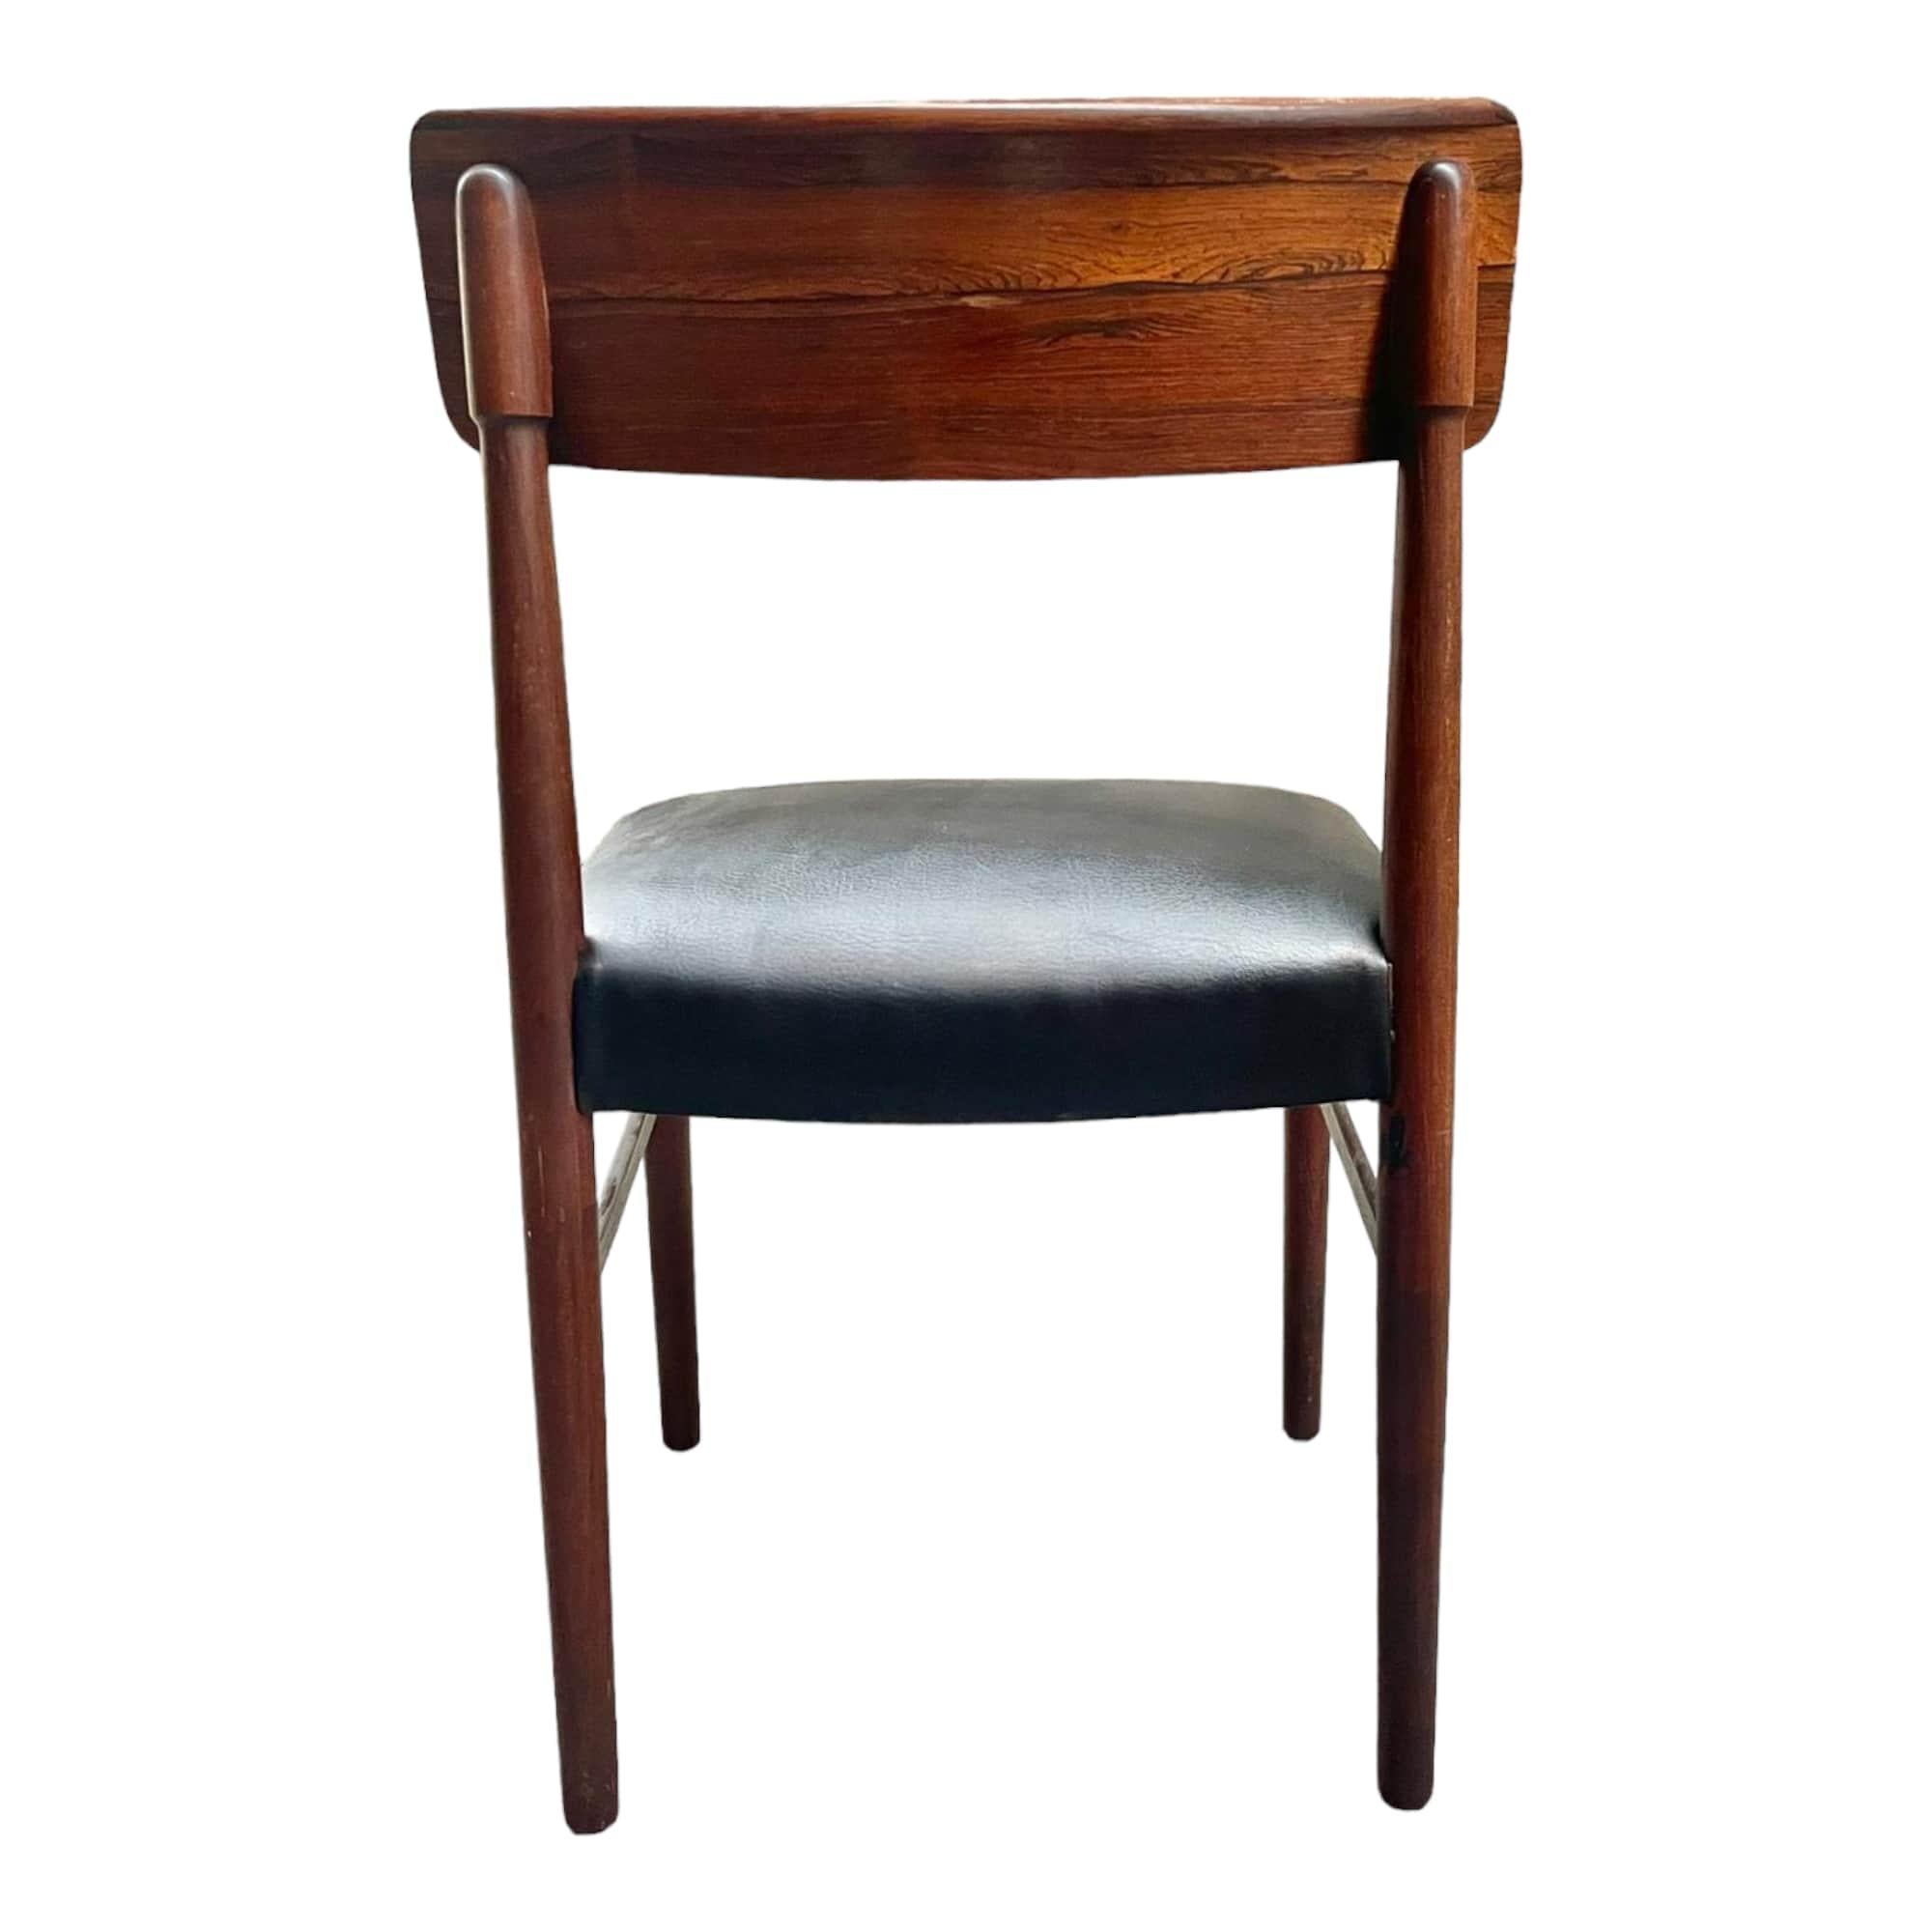 Mid-20th Century Danish 20th Century Rosewood Chairs  For Sale